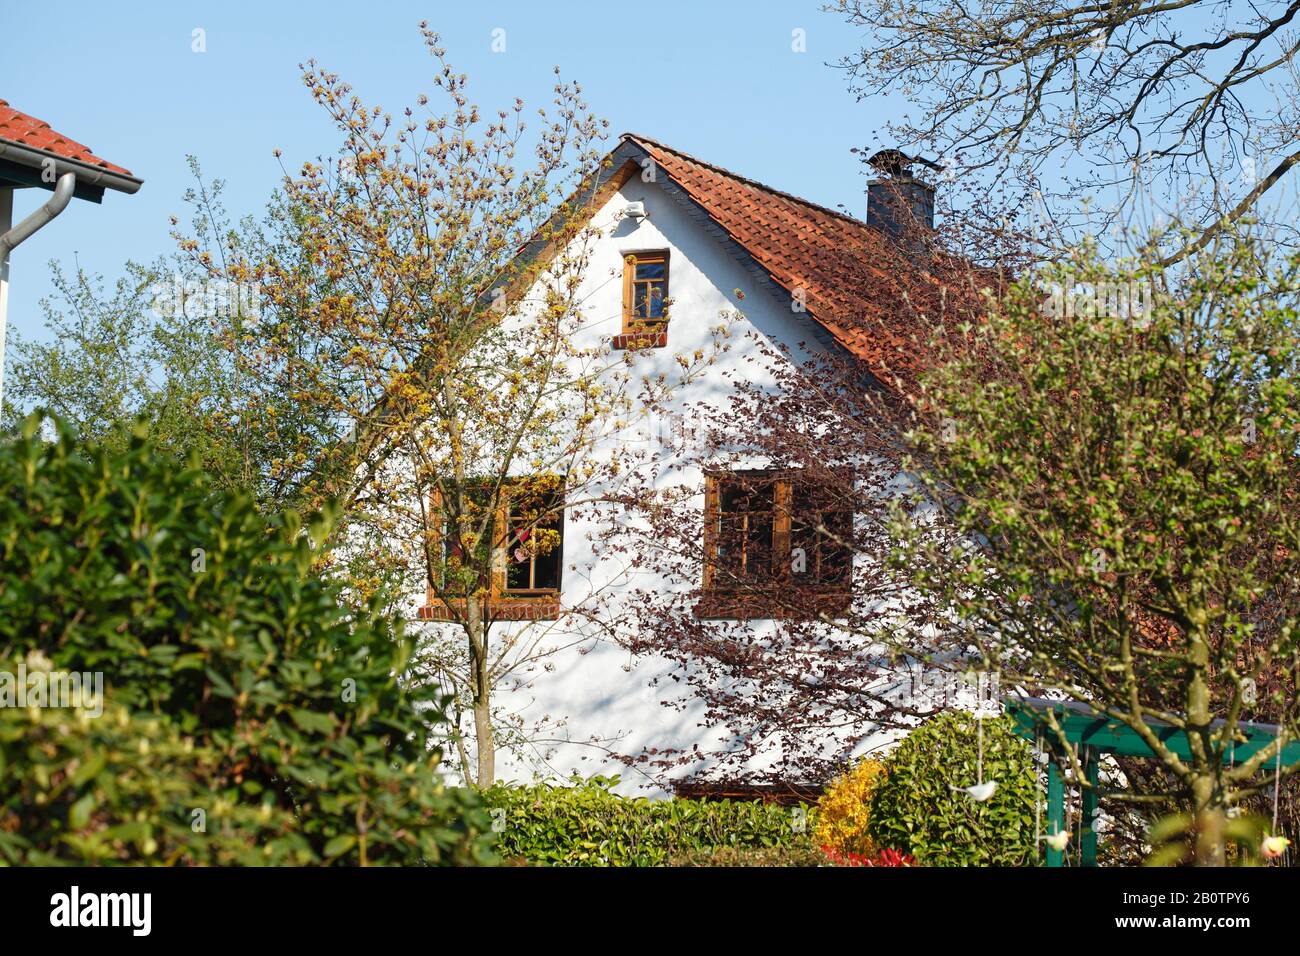 Modern residential building, single family house, Fischerhude, Lower Saxony, Germany, Europe Stock Photo